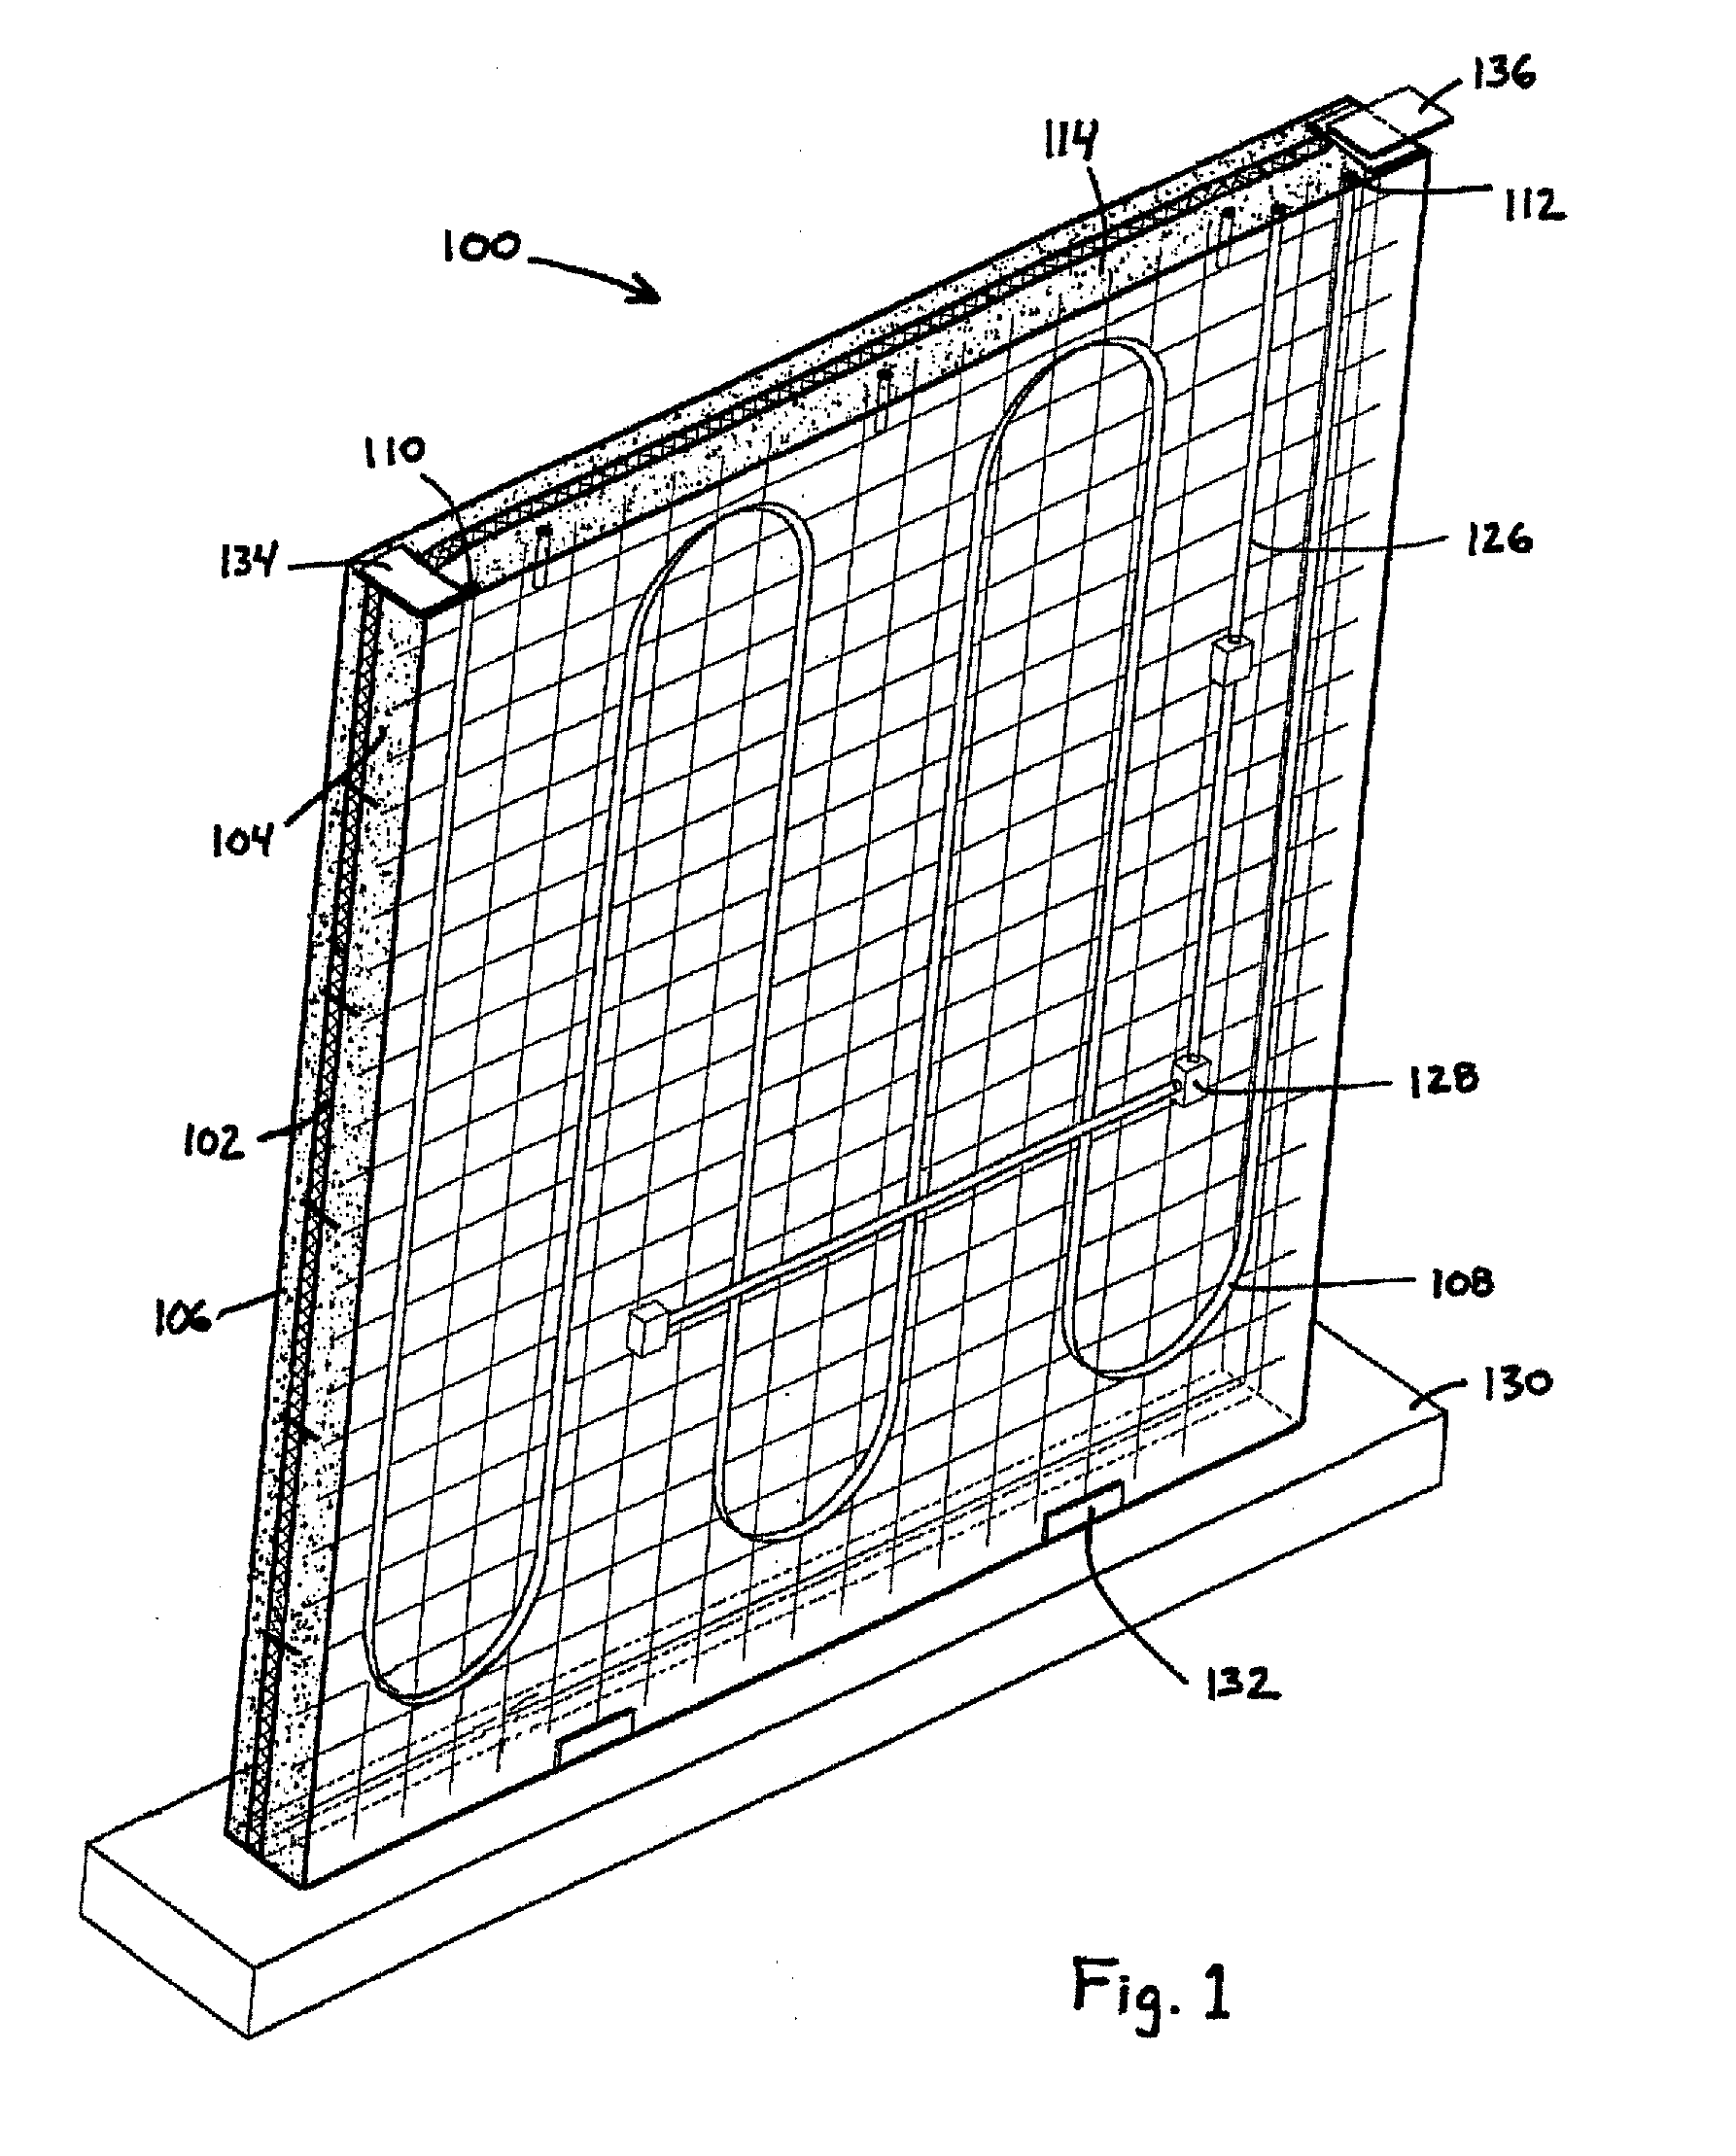 Systems and methods for controlling interior climates